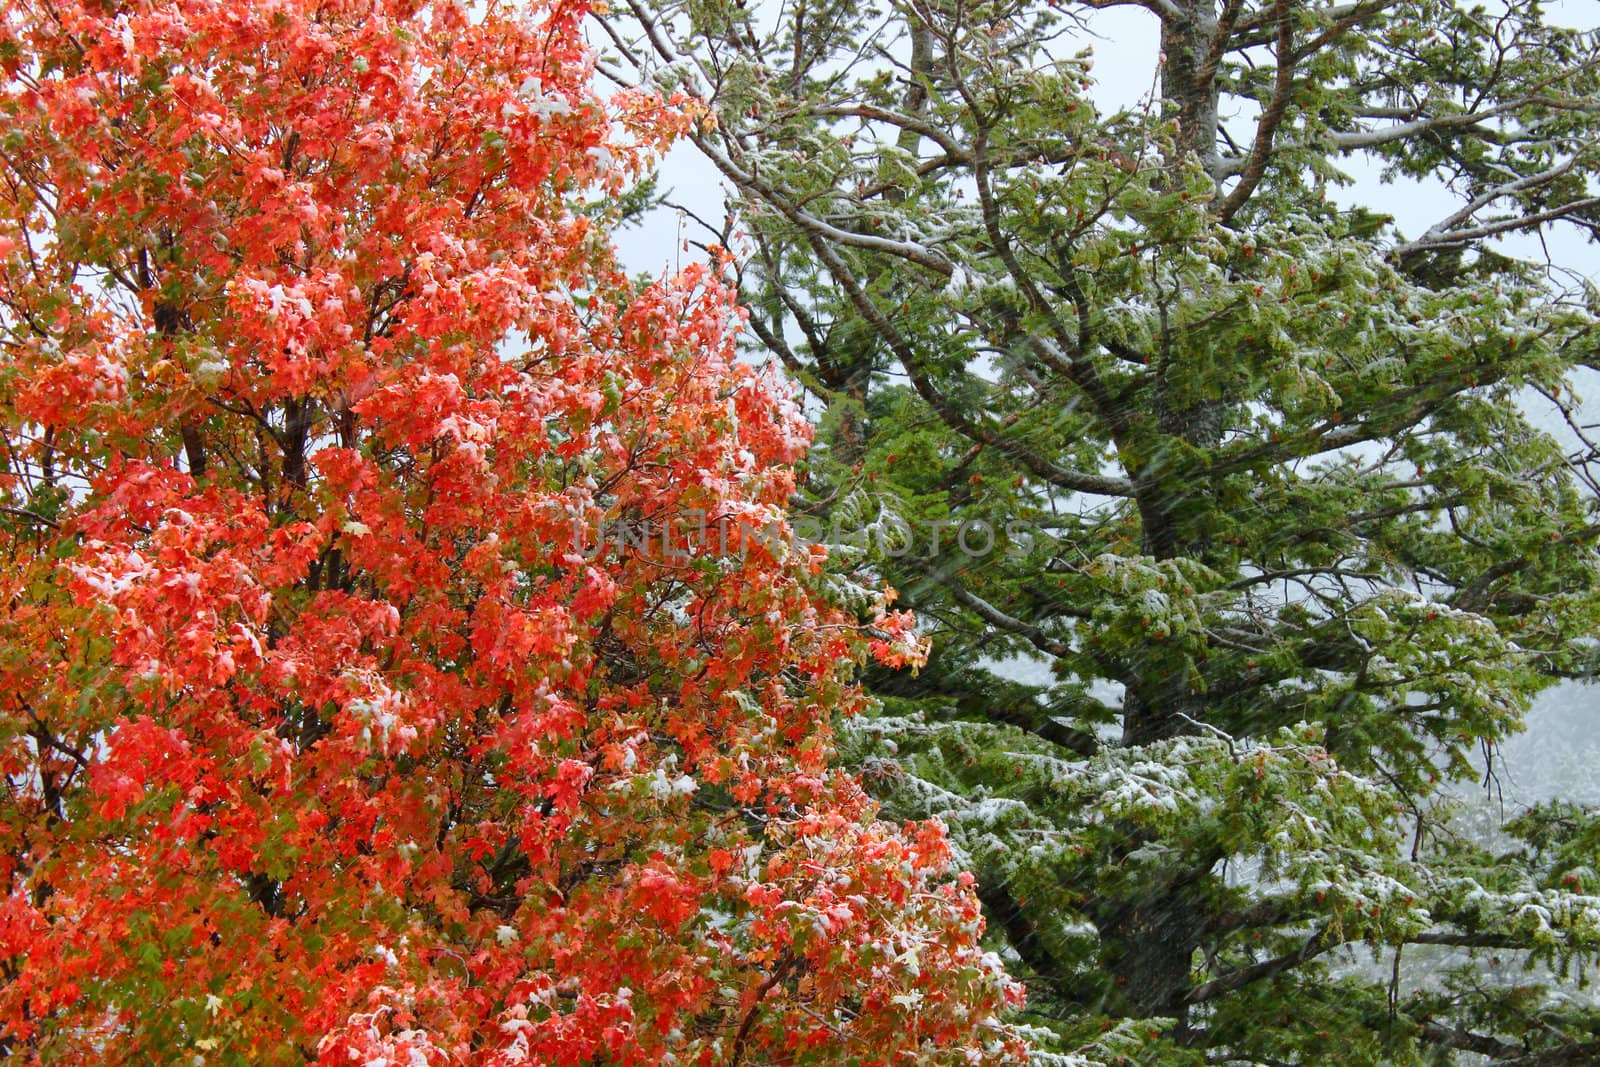 Early snowfall over autumn colors in the Targhee National Forest of Wyoming.